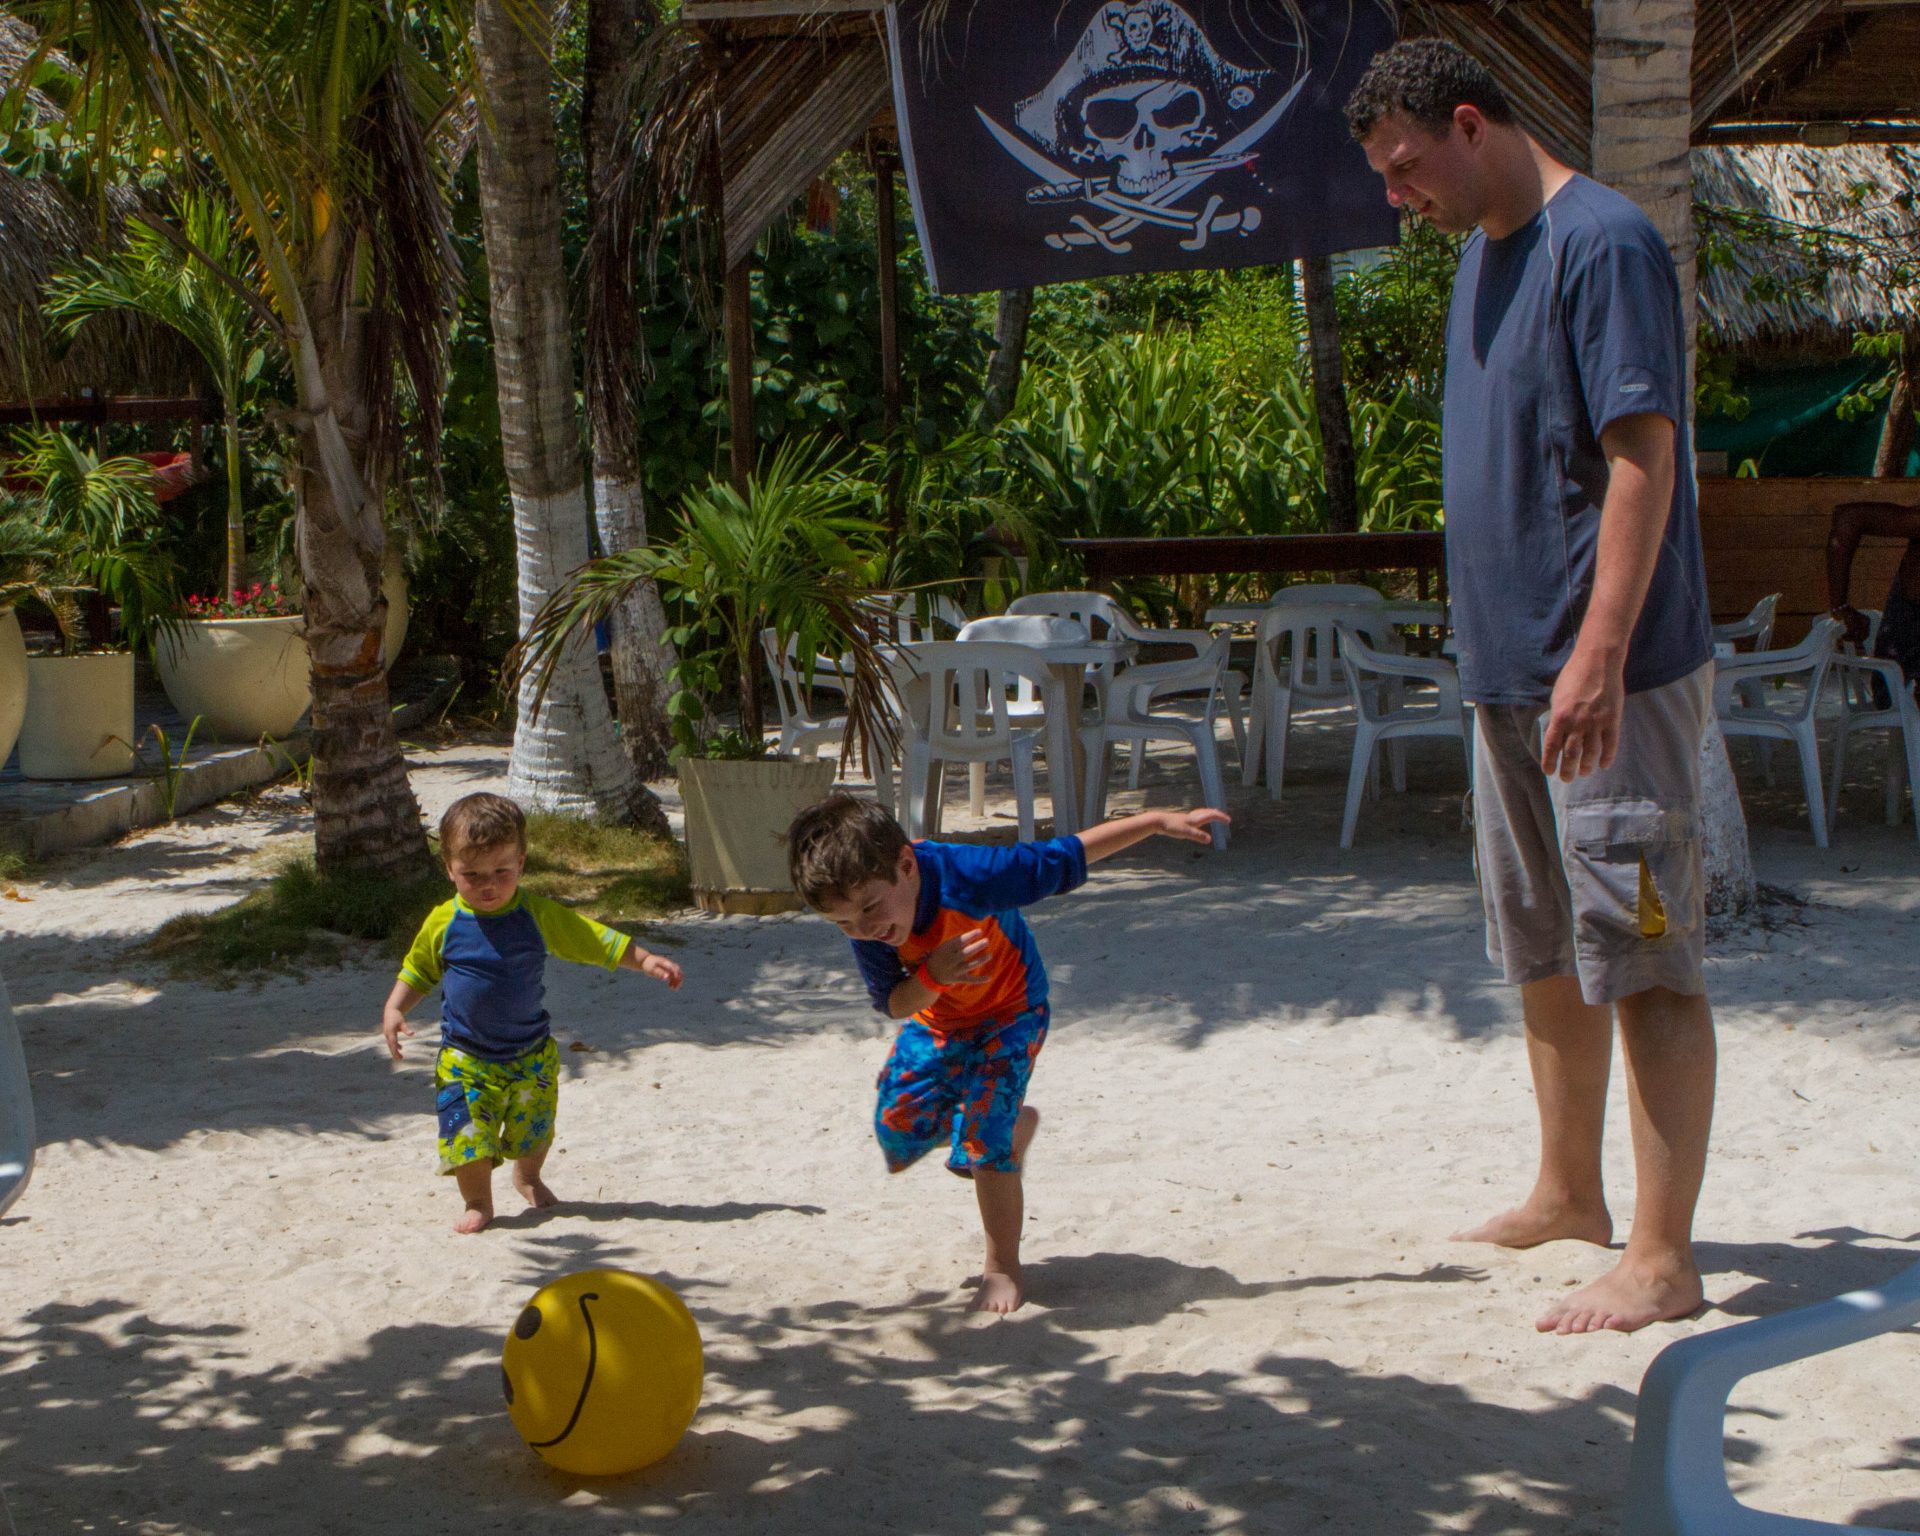 Boys playing soccer with a beach ball in the sands of Pirate Island while man watches.